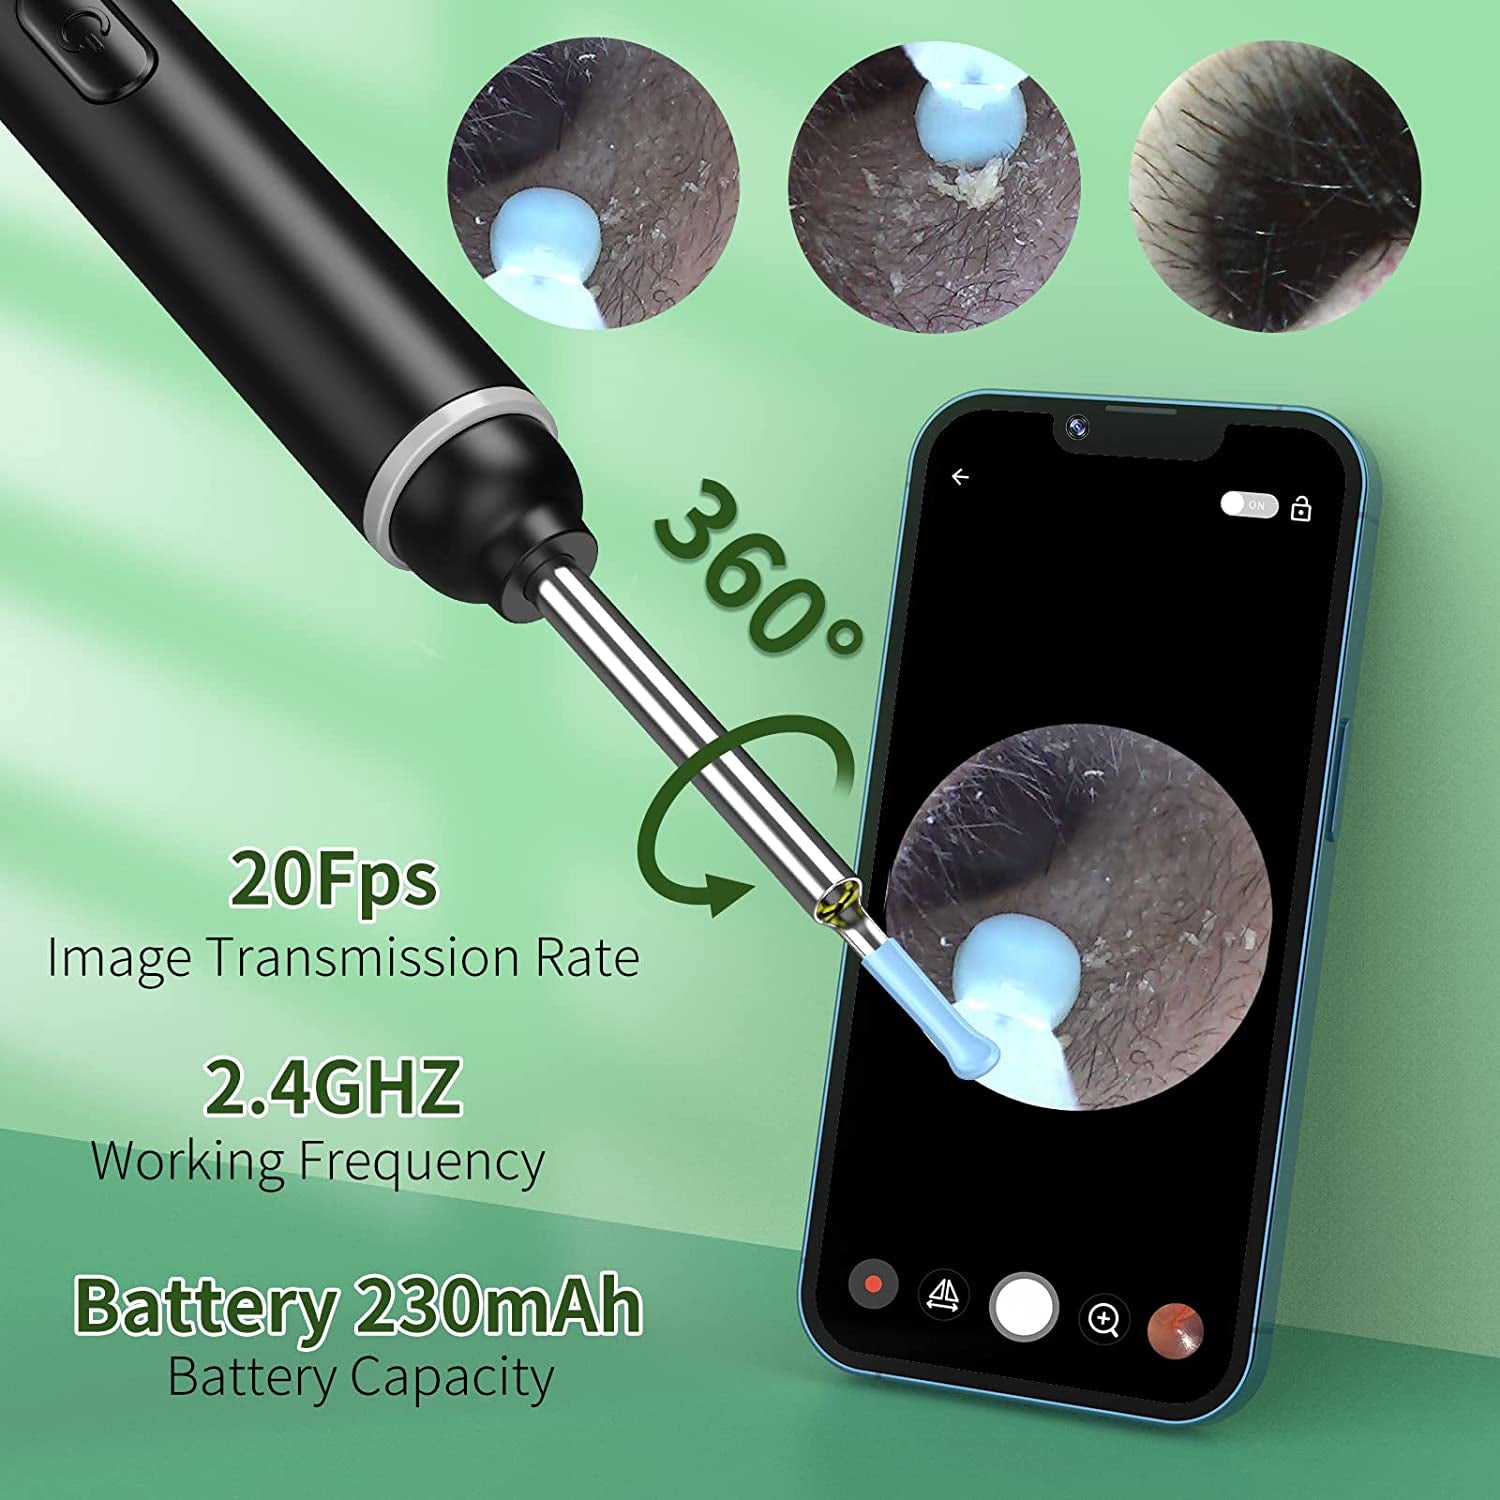 Ear Wax Removal Kit Ear Camera 1920P HD Ear Wax Removal Tool Ear Cleaner Otoscope with 6 LED Lights, 3Mm Visual Ear Scope for Iphone Ipad Android